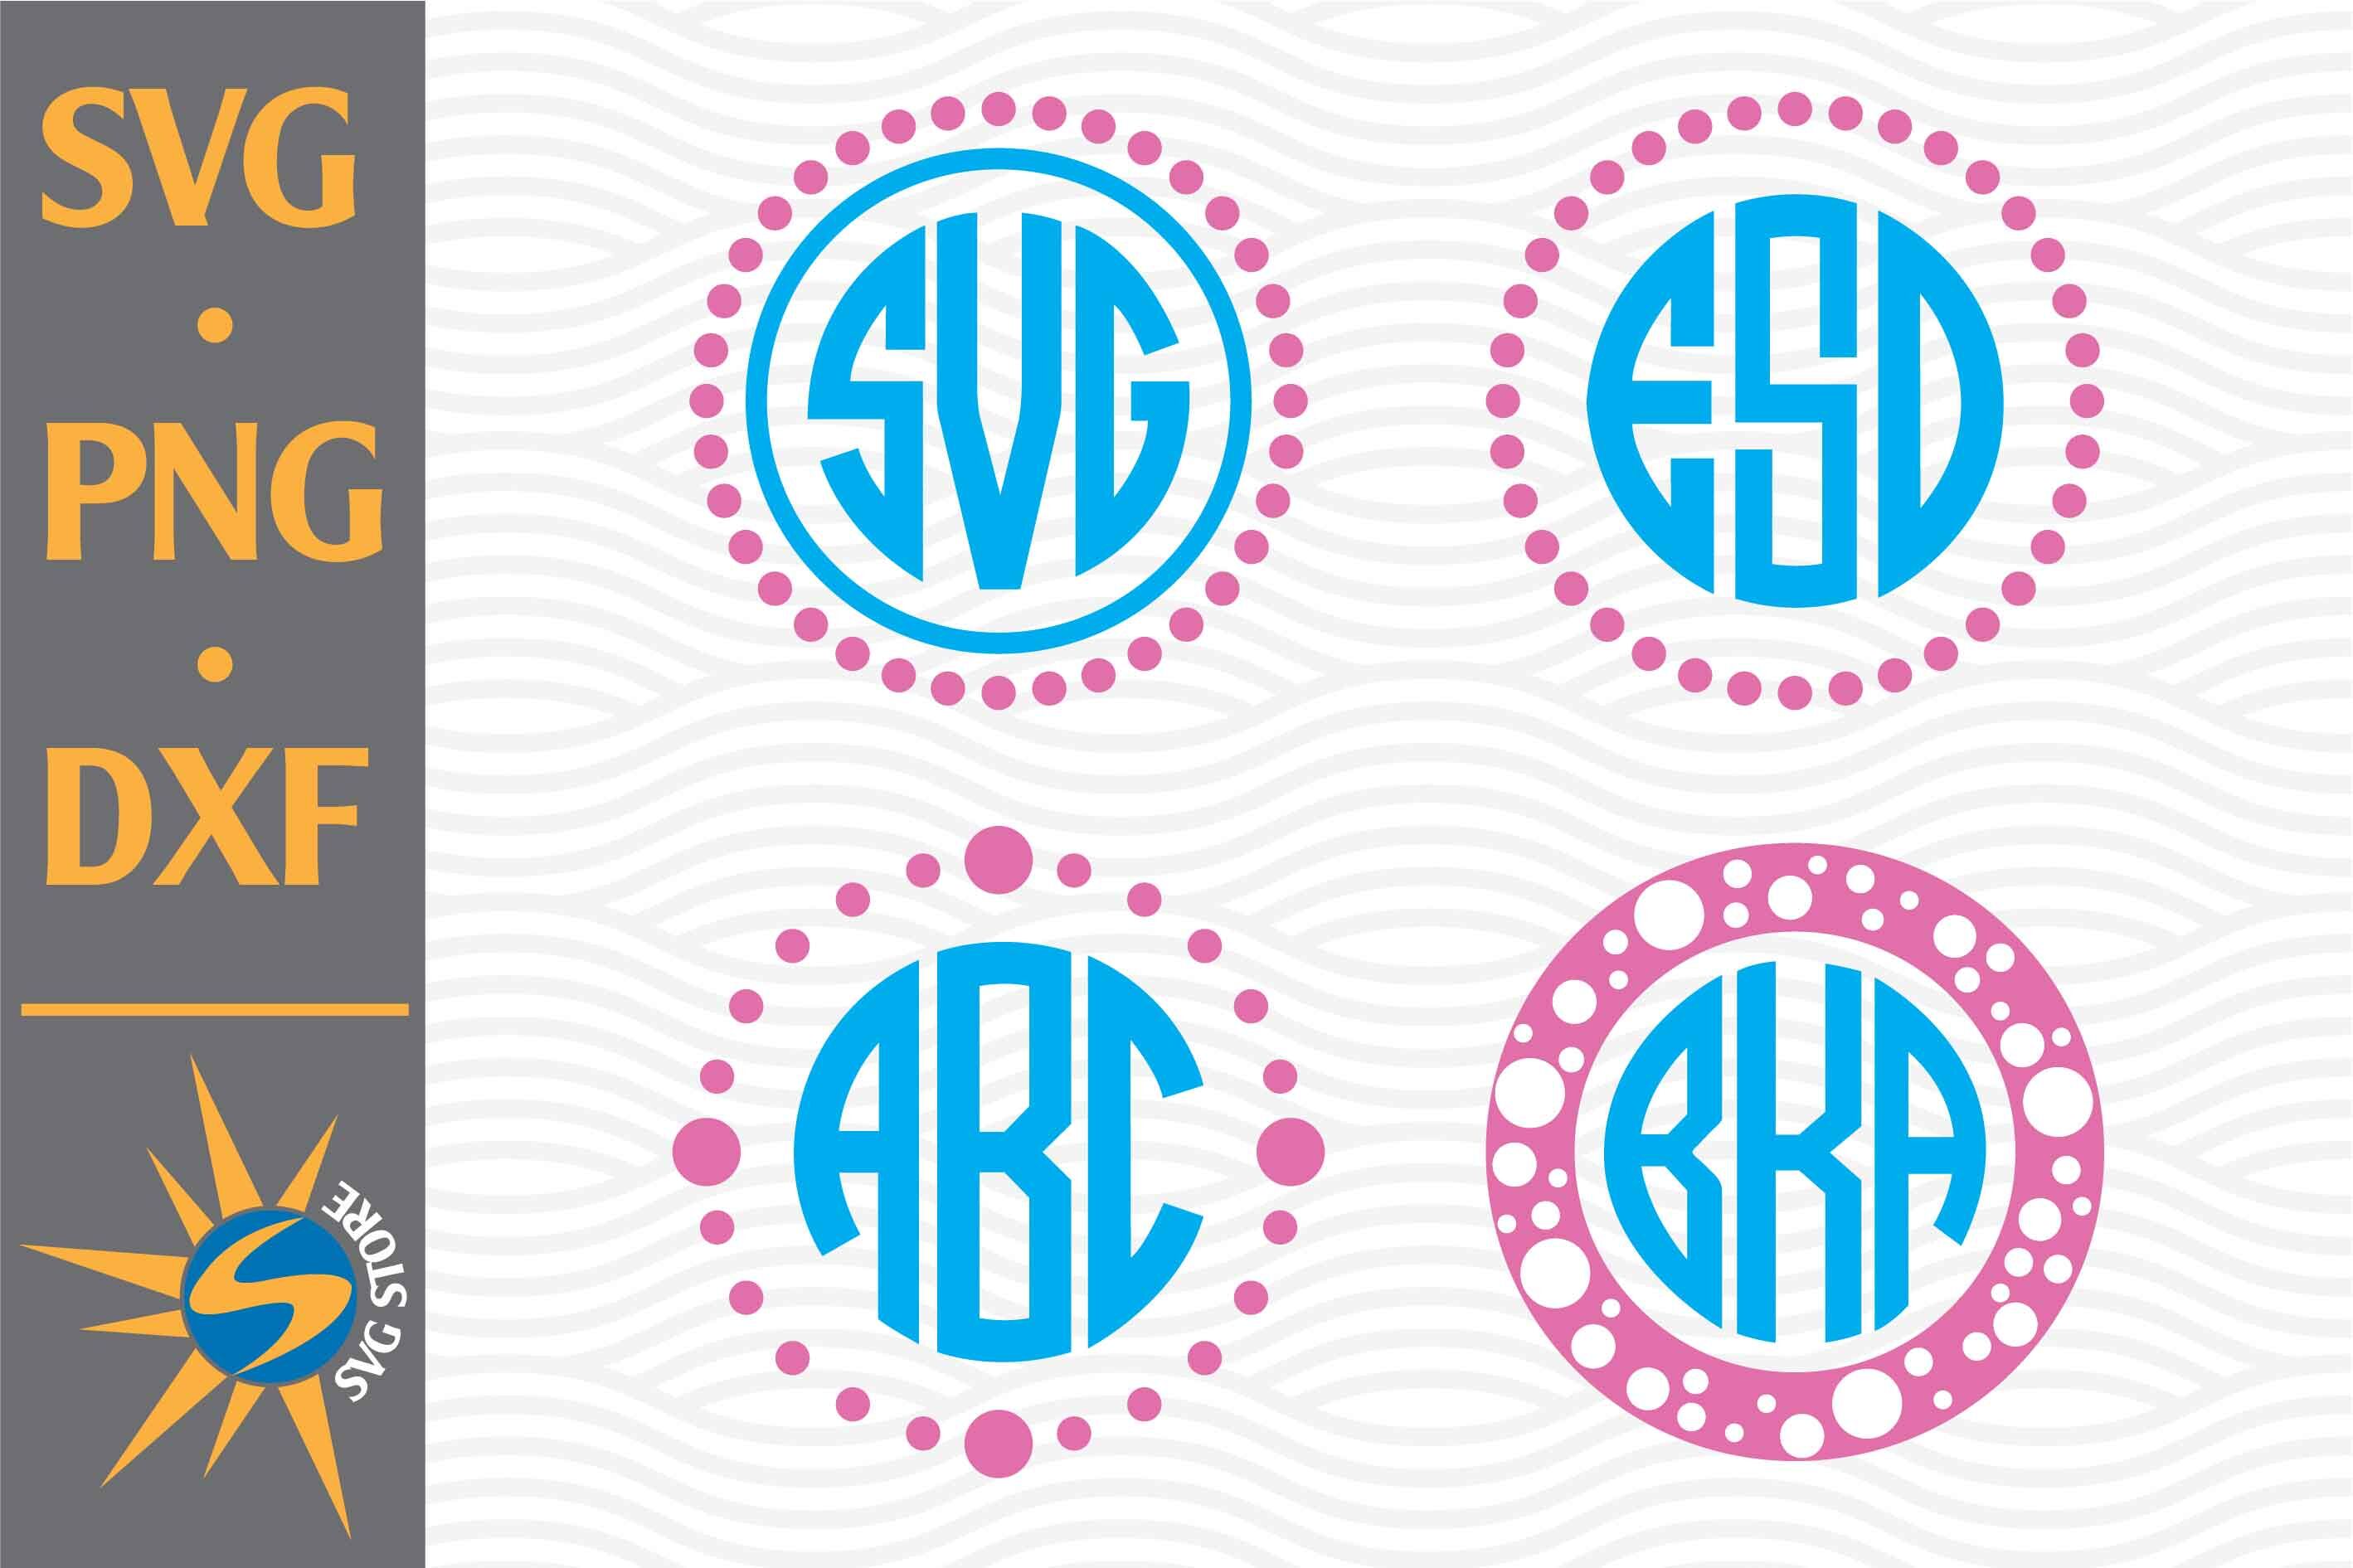 Dot Circle Monogram SVG, PNG, DXF. Instant download files for Cricut Design  Space, Silhouette, Cutting, Printing, or more